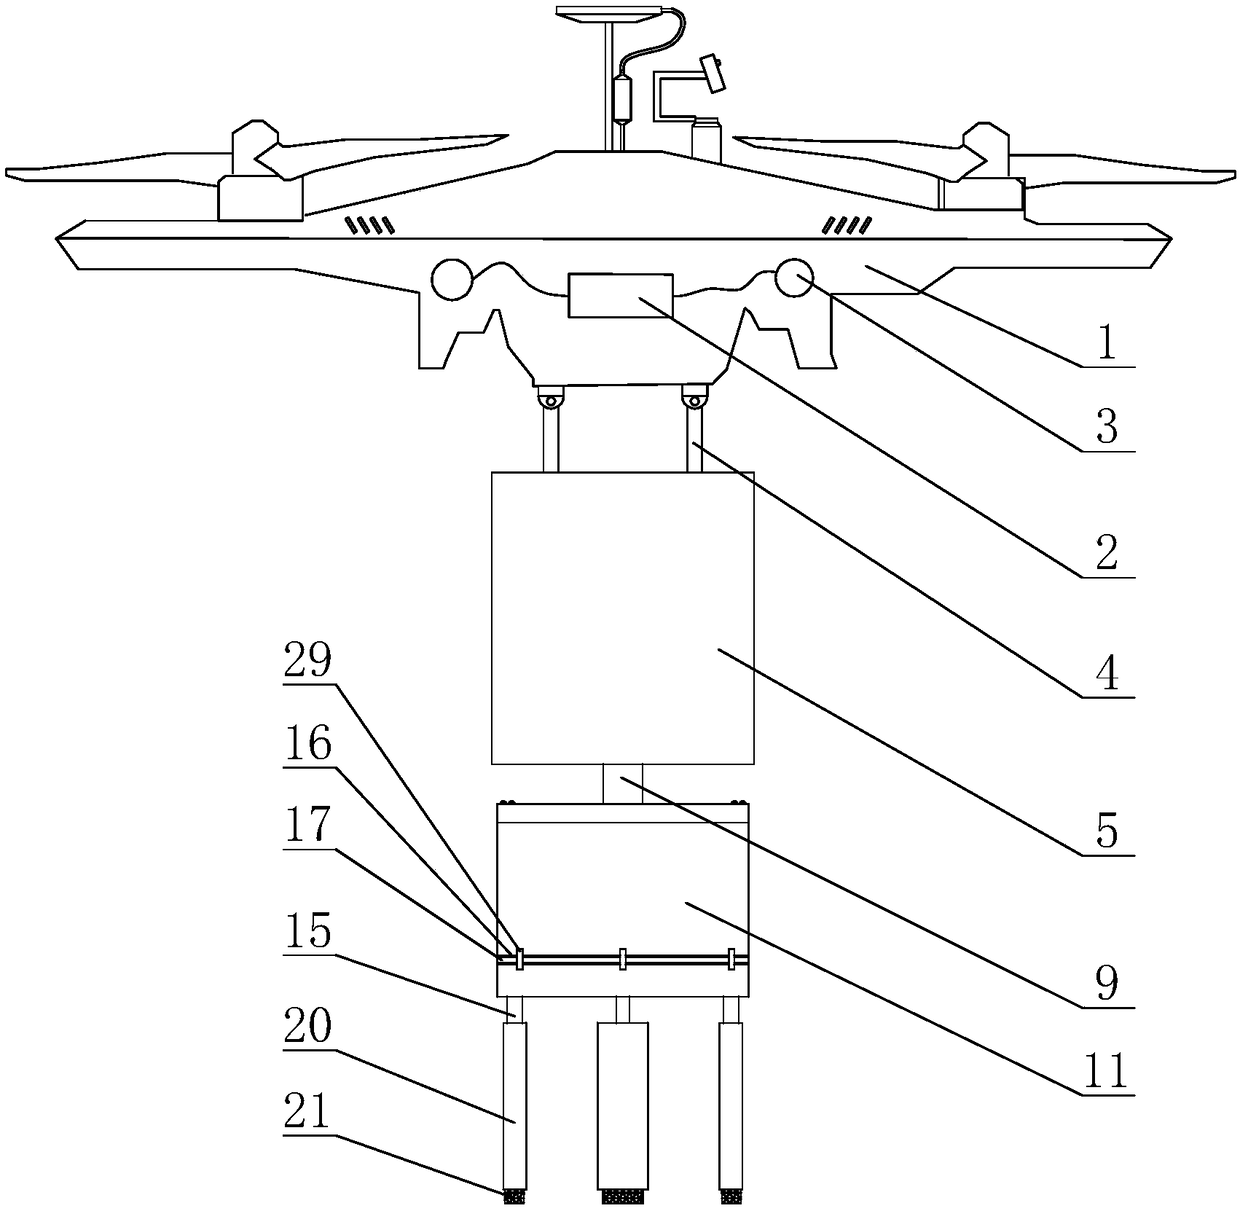 Unmanned aerial vehicle emergency safety landing device for bridge detection